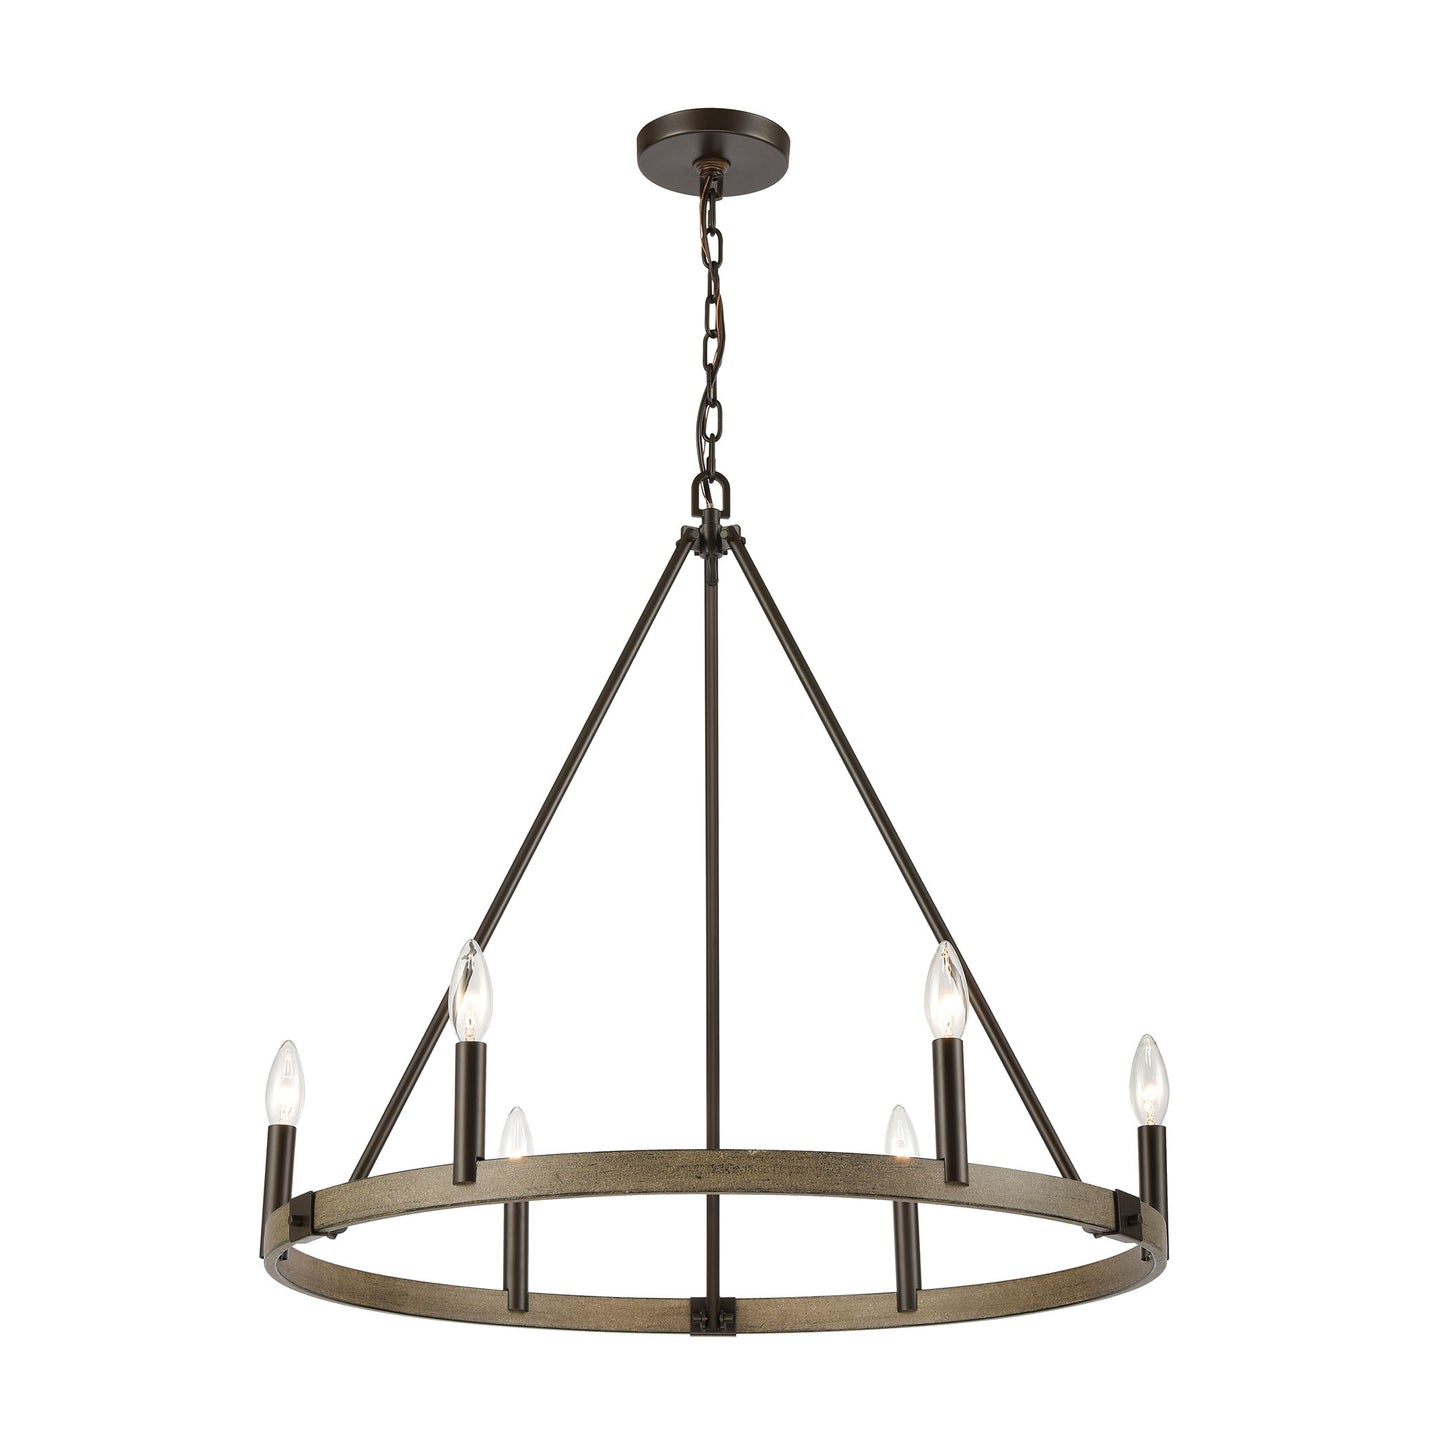 ELK Lighting 12316/6 - Transitions 27" Wide 6-Light Chandelier in Oil Rubbed Bronze and Aspen Finish